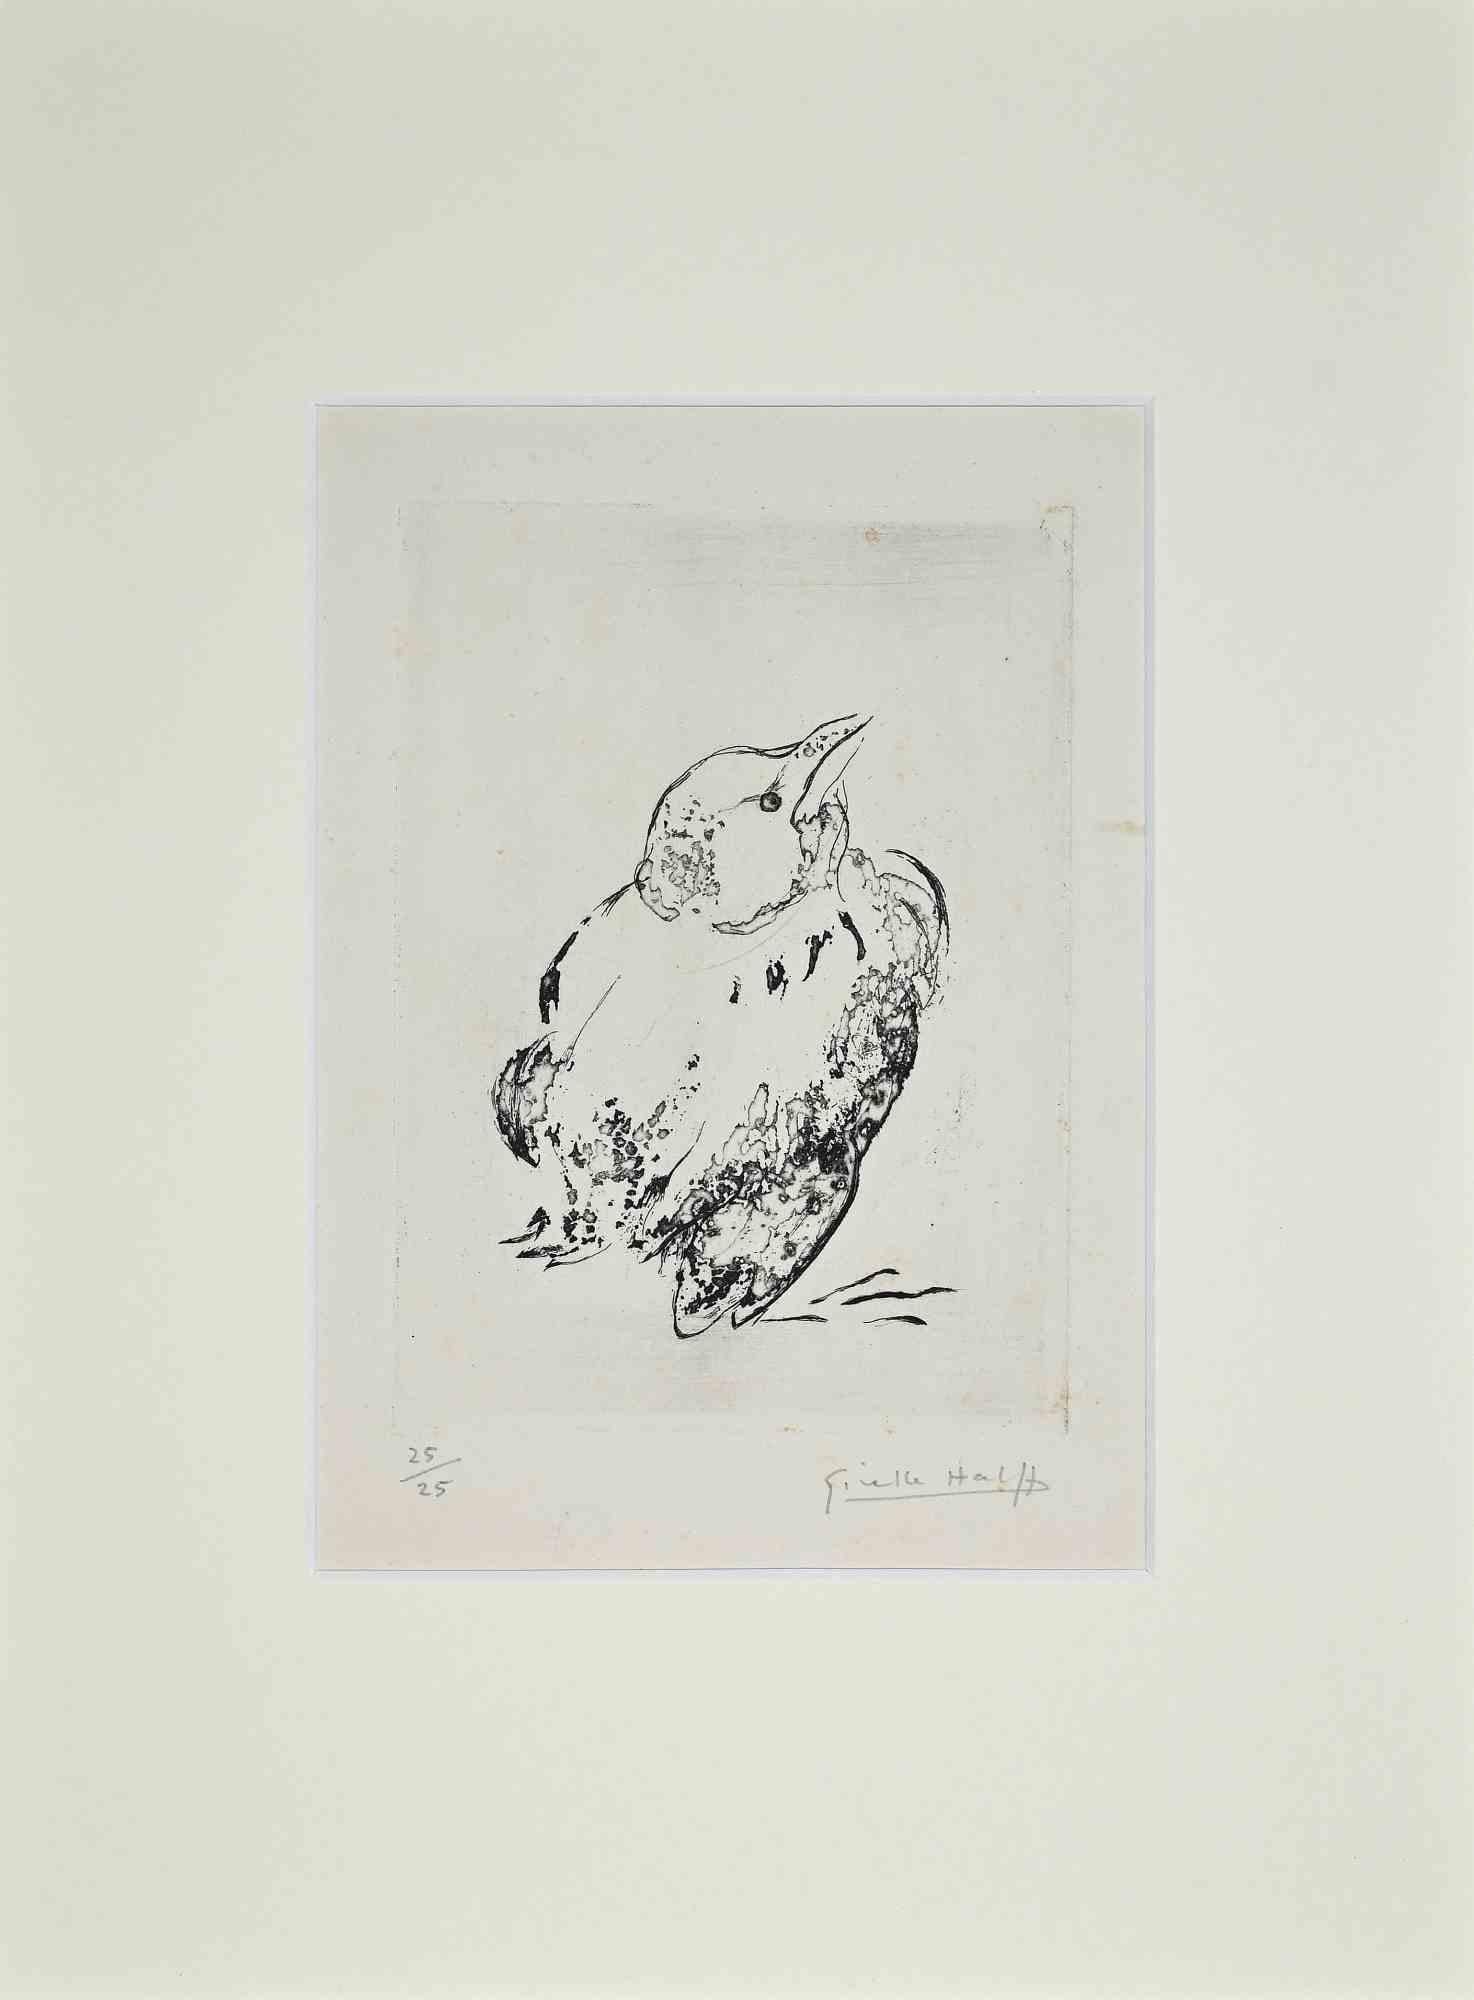 Bird - Original Etching and Aquatint by Giselle Hallf - Mid-20th Century - Print by Giselle Halff